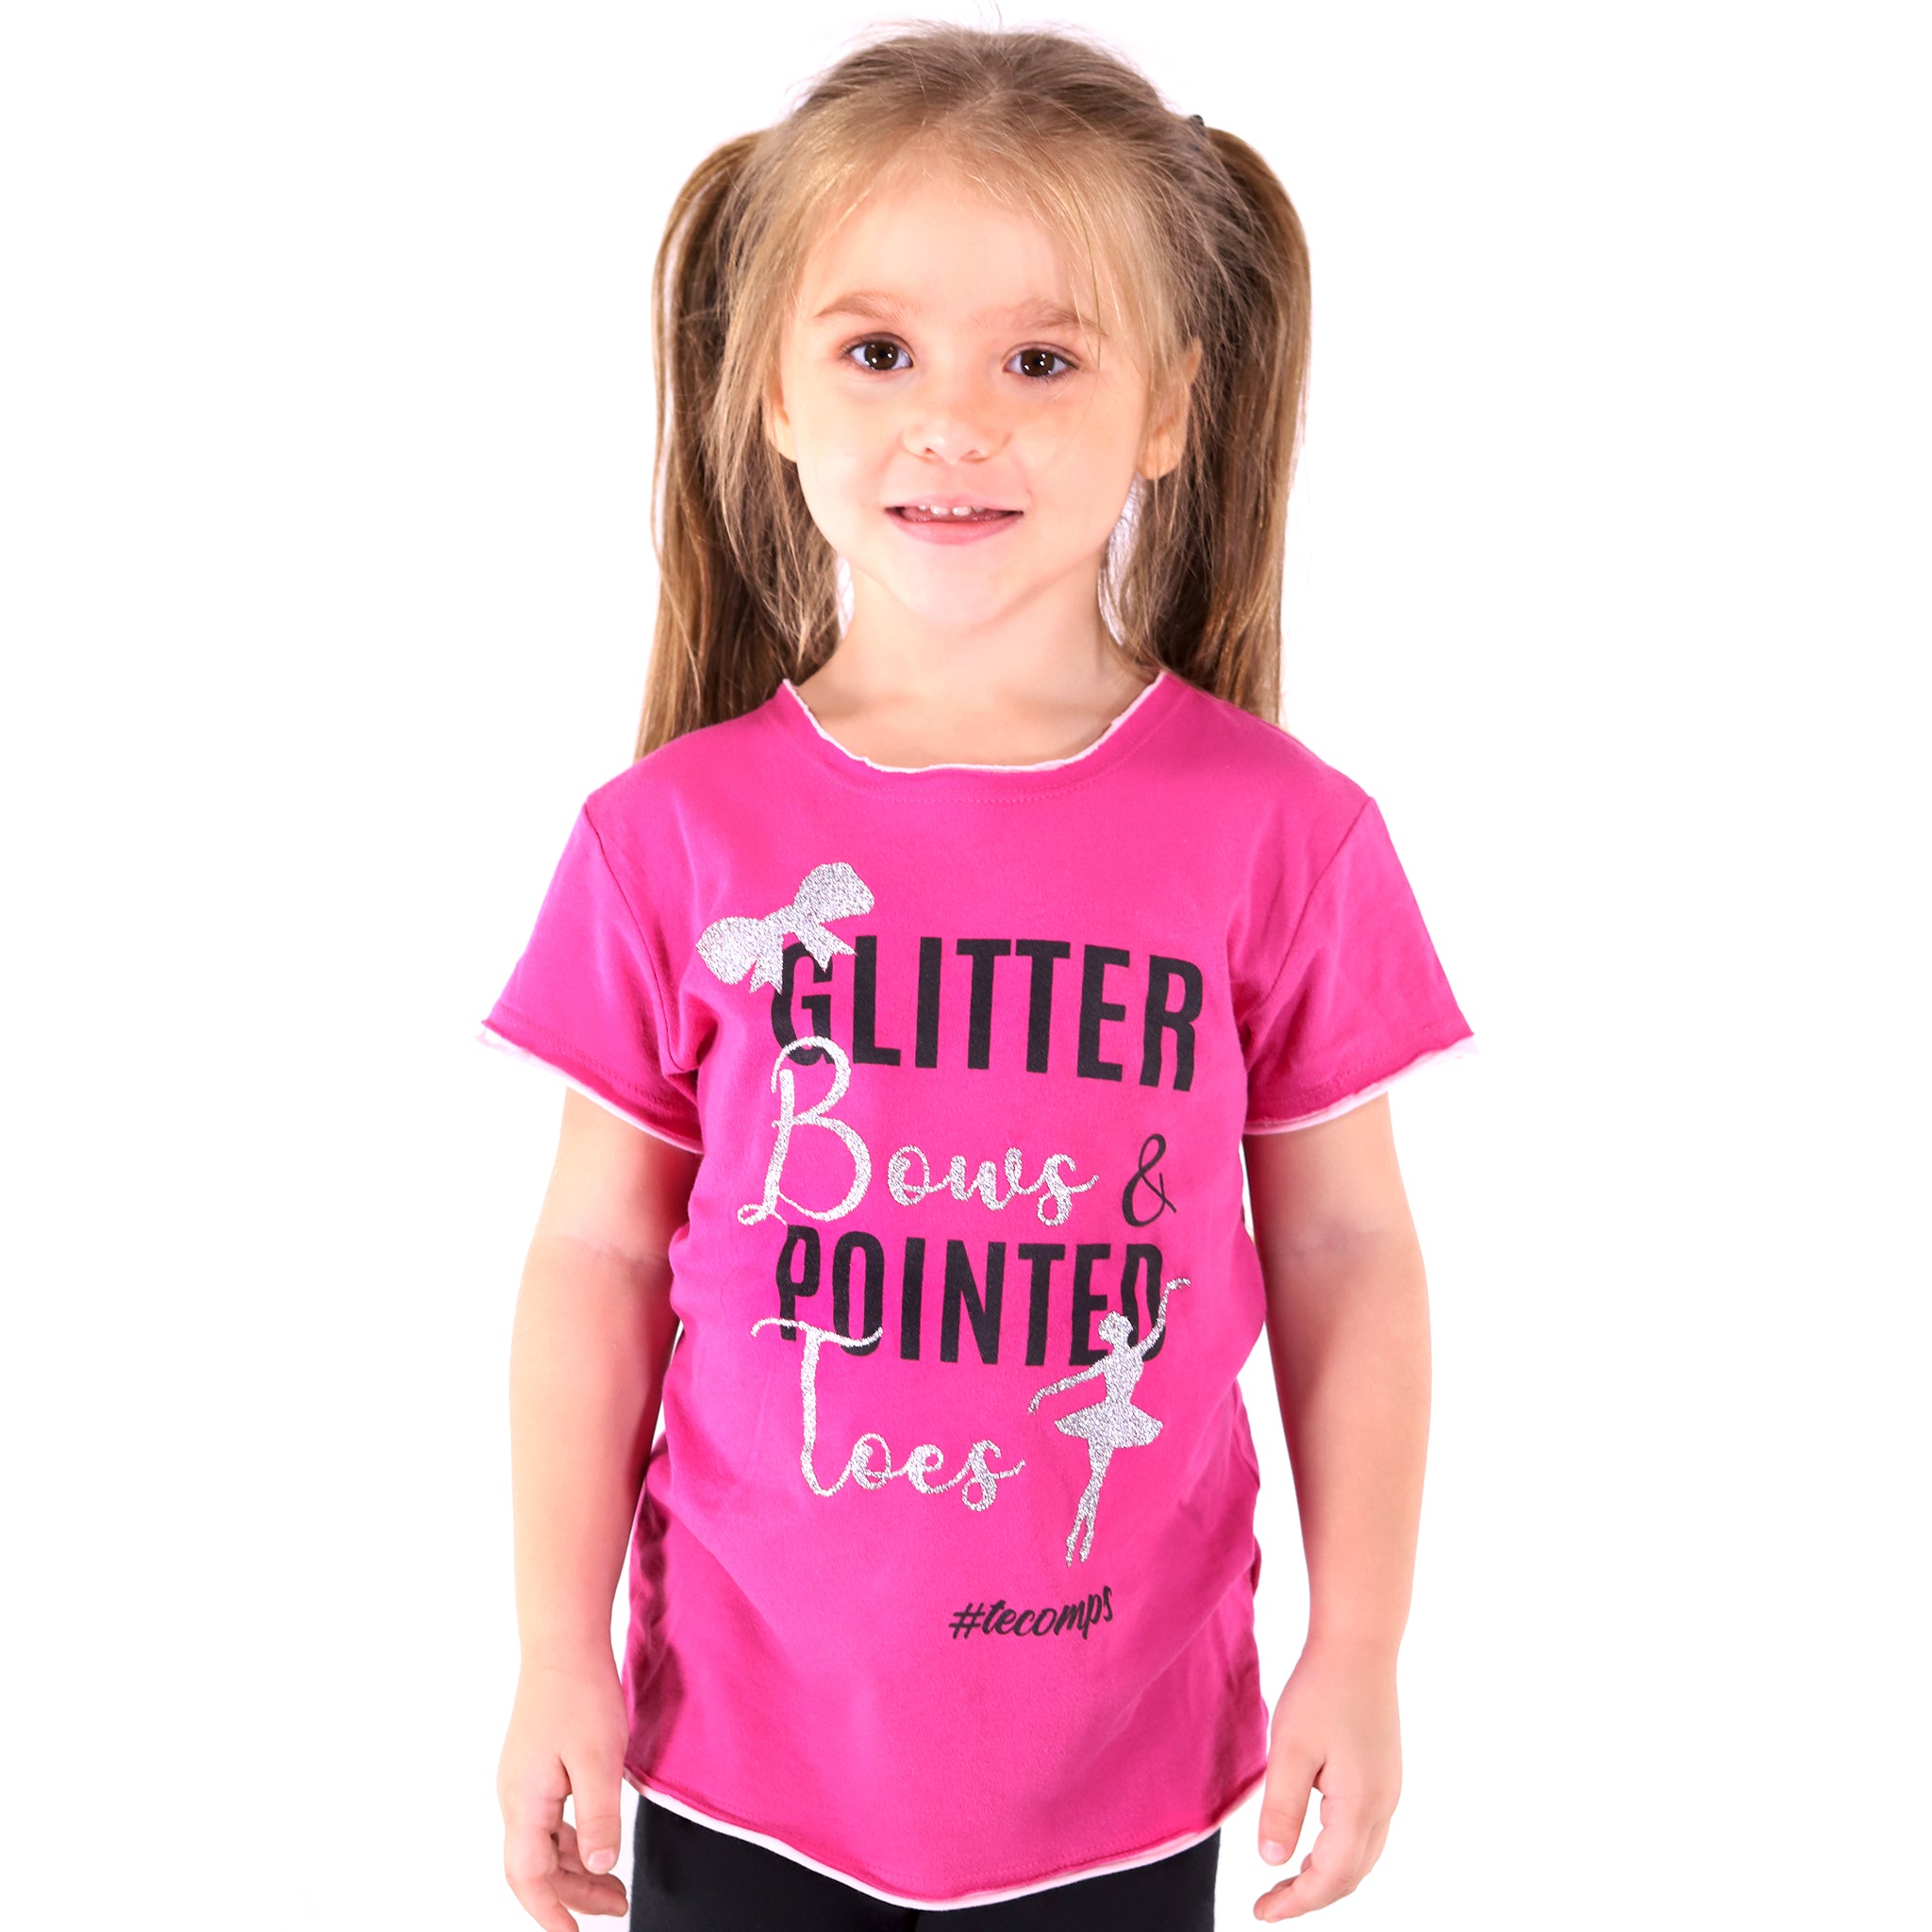 Glitter Bows & Pointed Toes Shirt